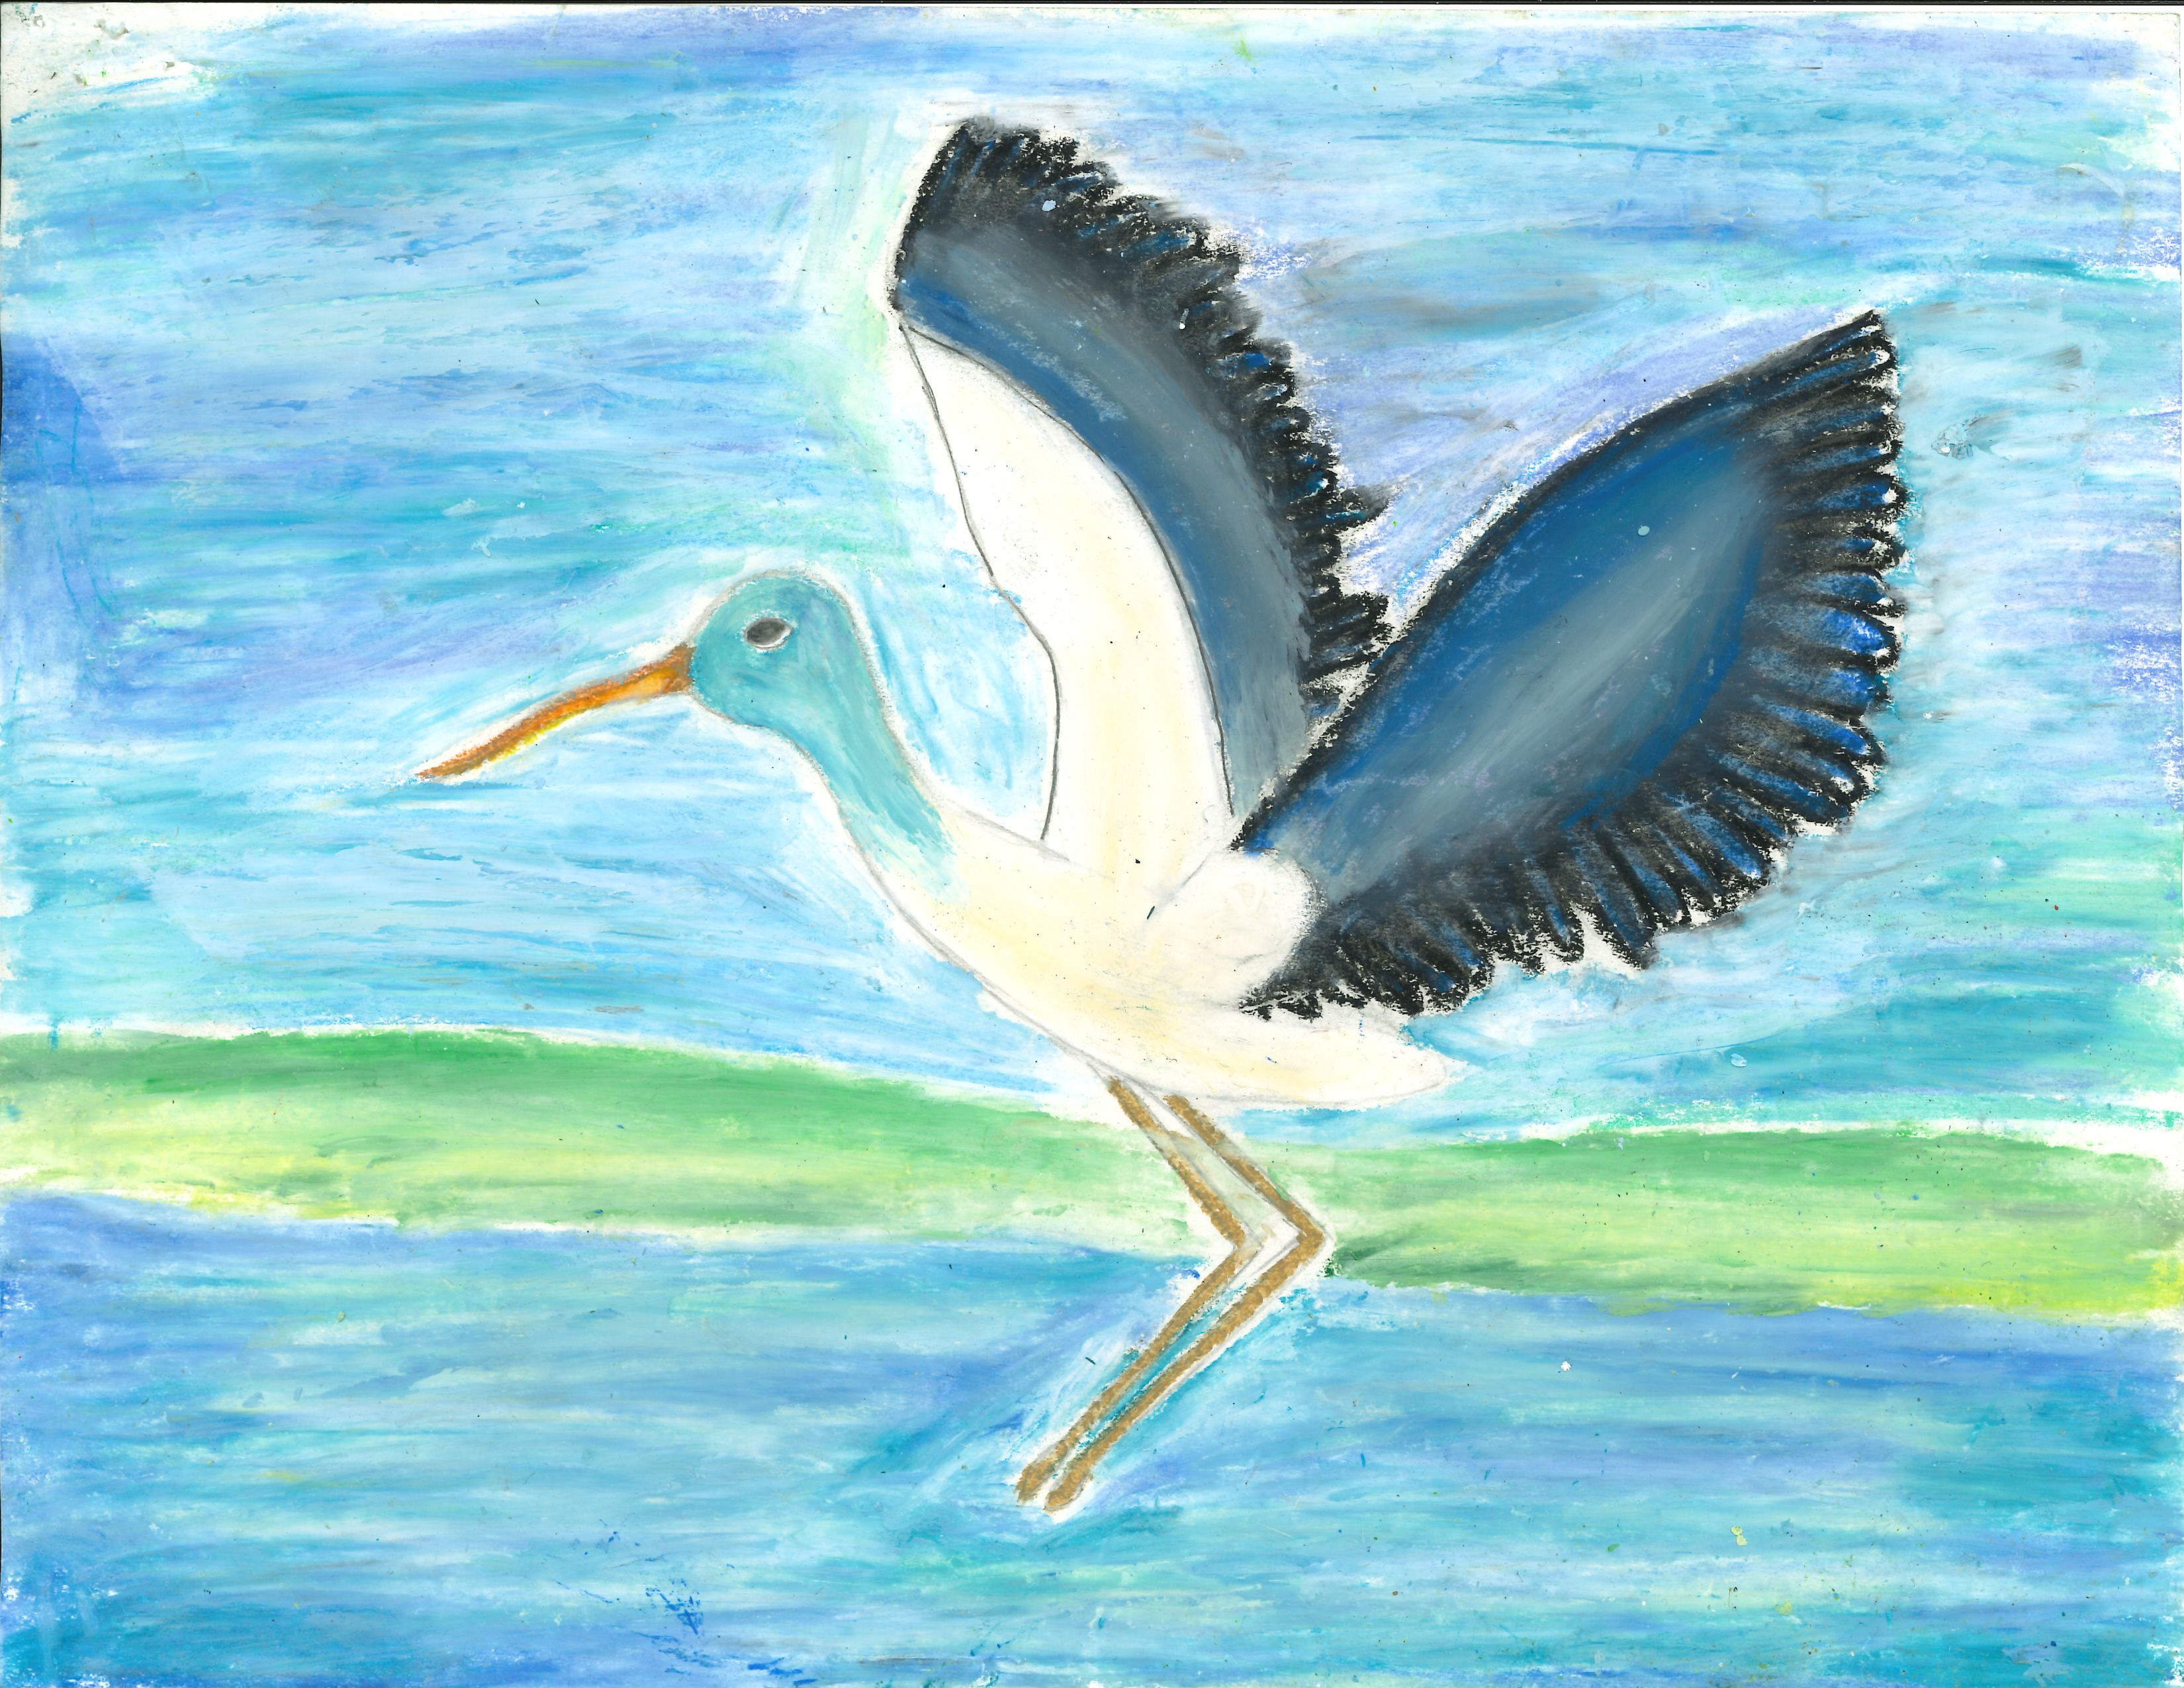 5th Grade - 1st Place and Calendar Selection, Wood Stork